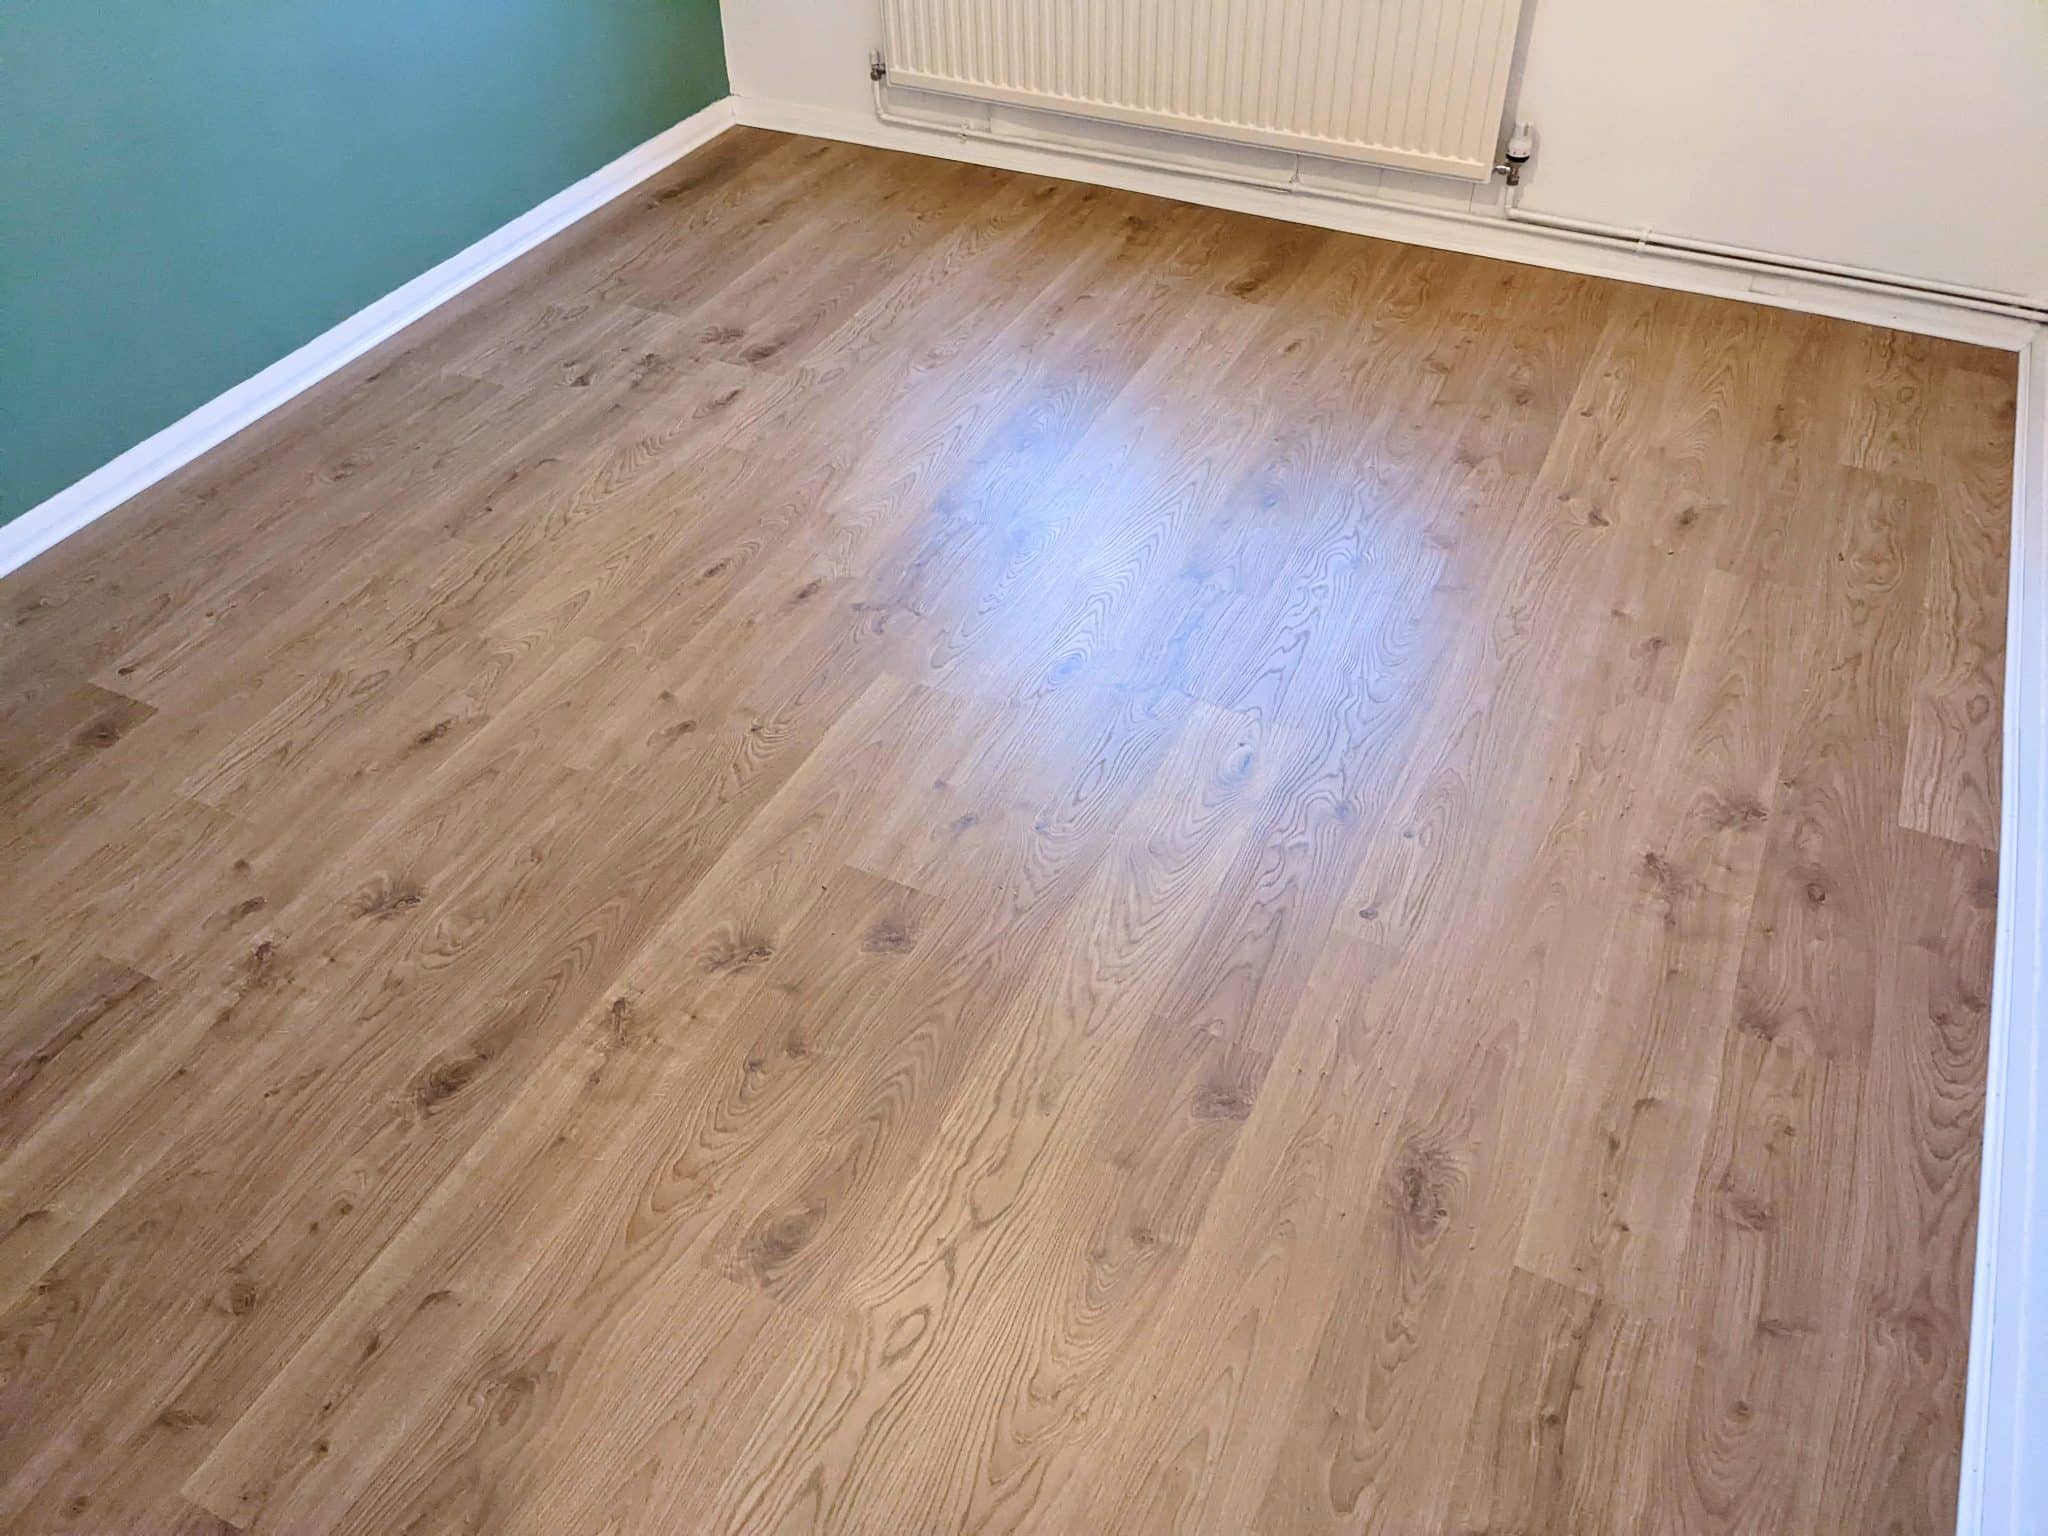 Image of a room with QuickStep laminate flooring in a light oak finish, showcasing the planks' detailed wood grain pattern. The room features green walls, white skirting, and a white radiator, highlighting the warm tones of the laminate.